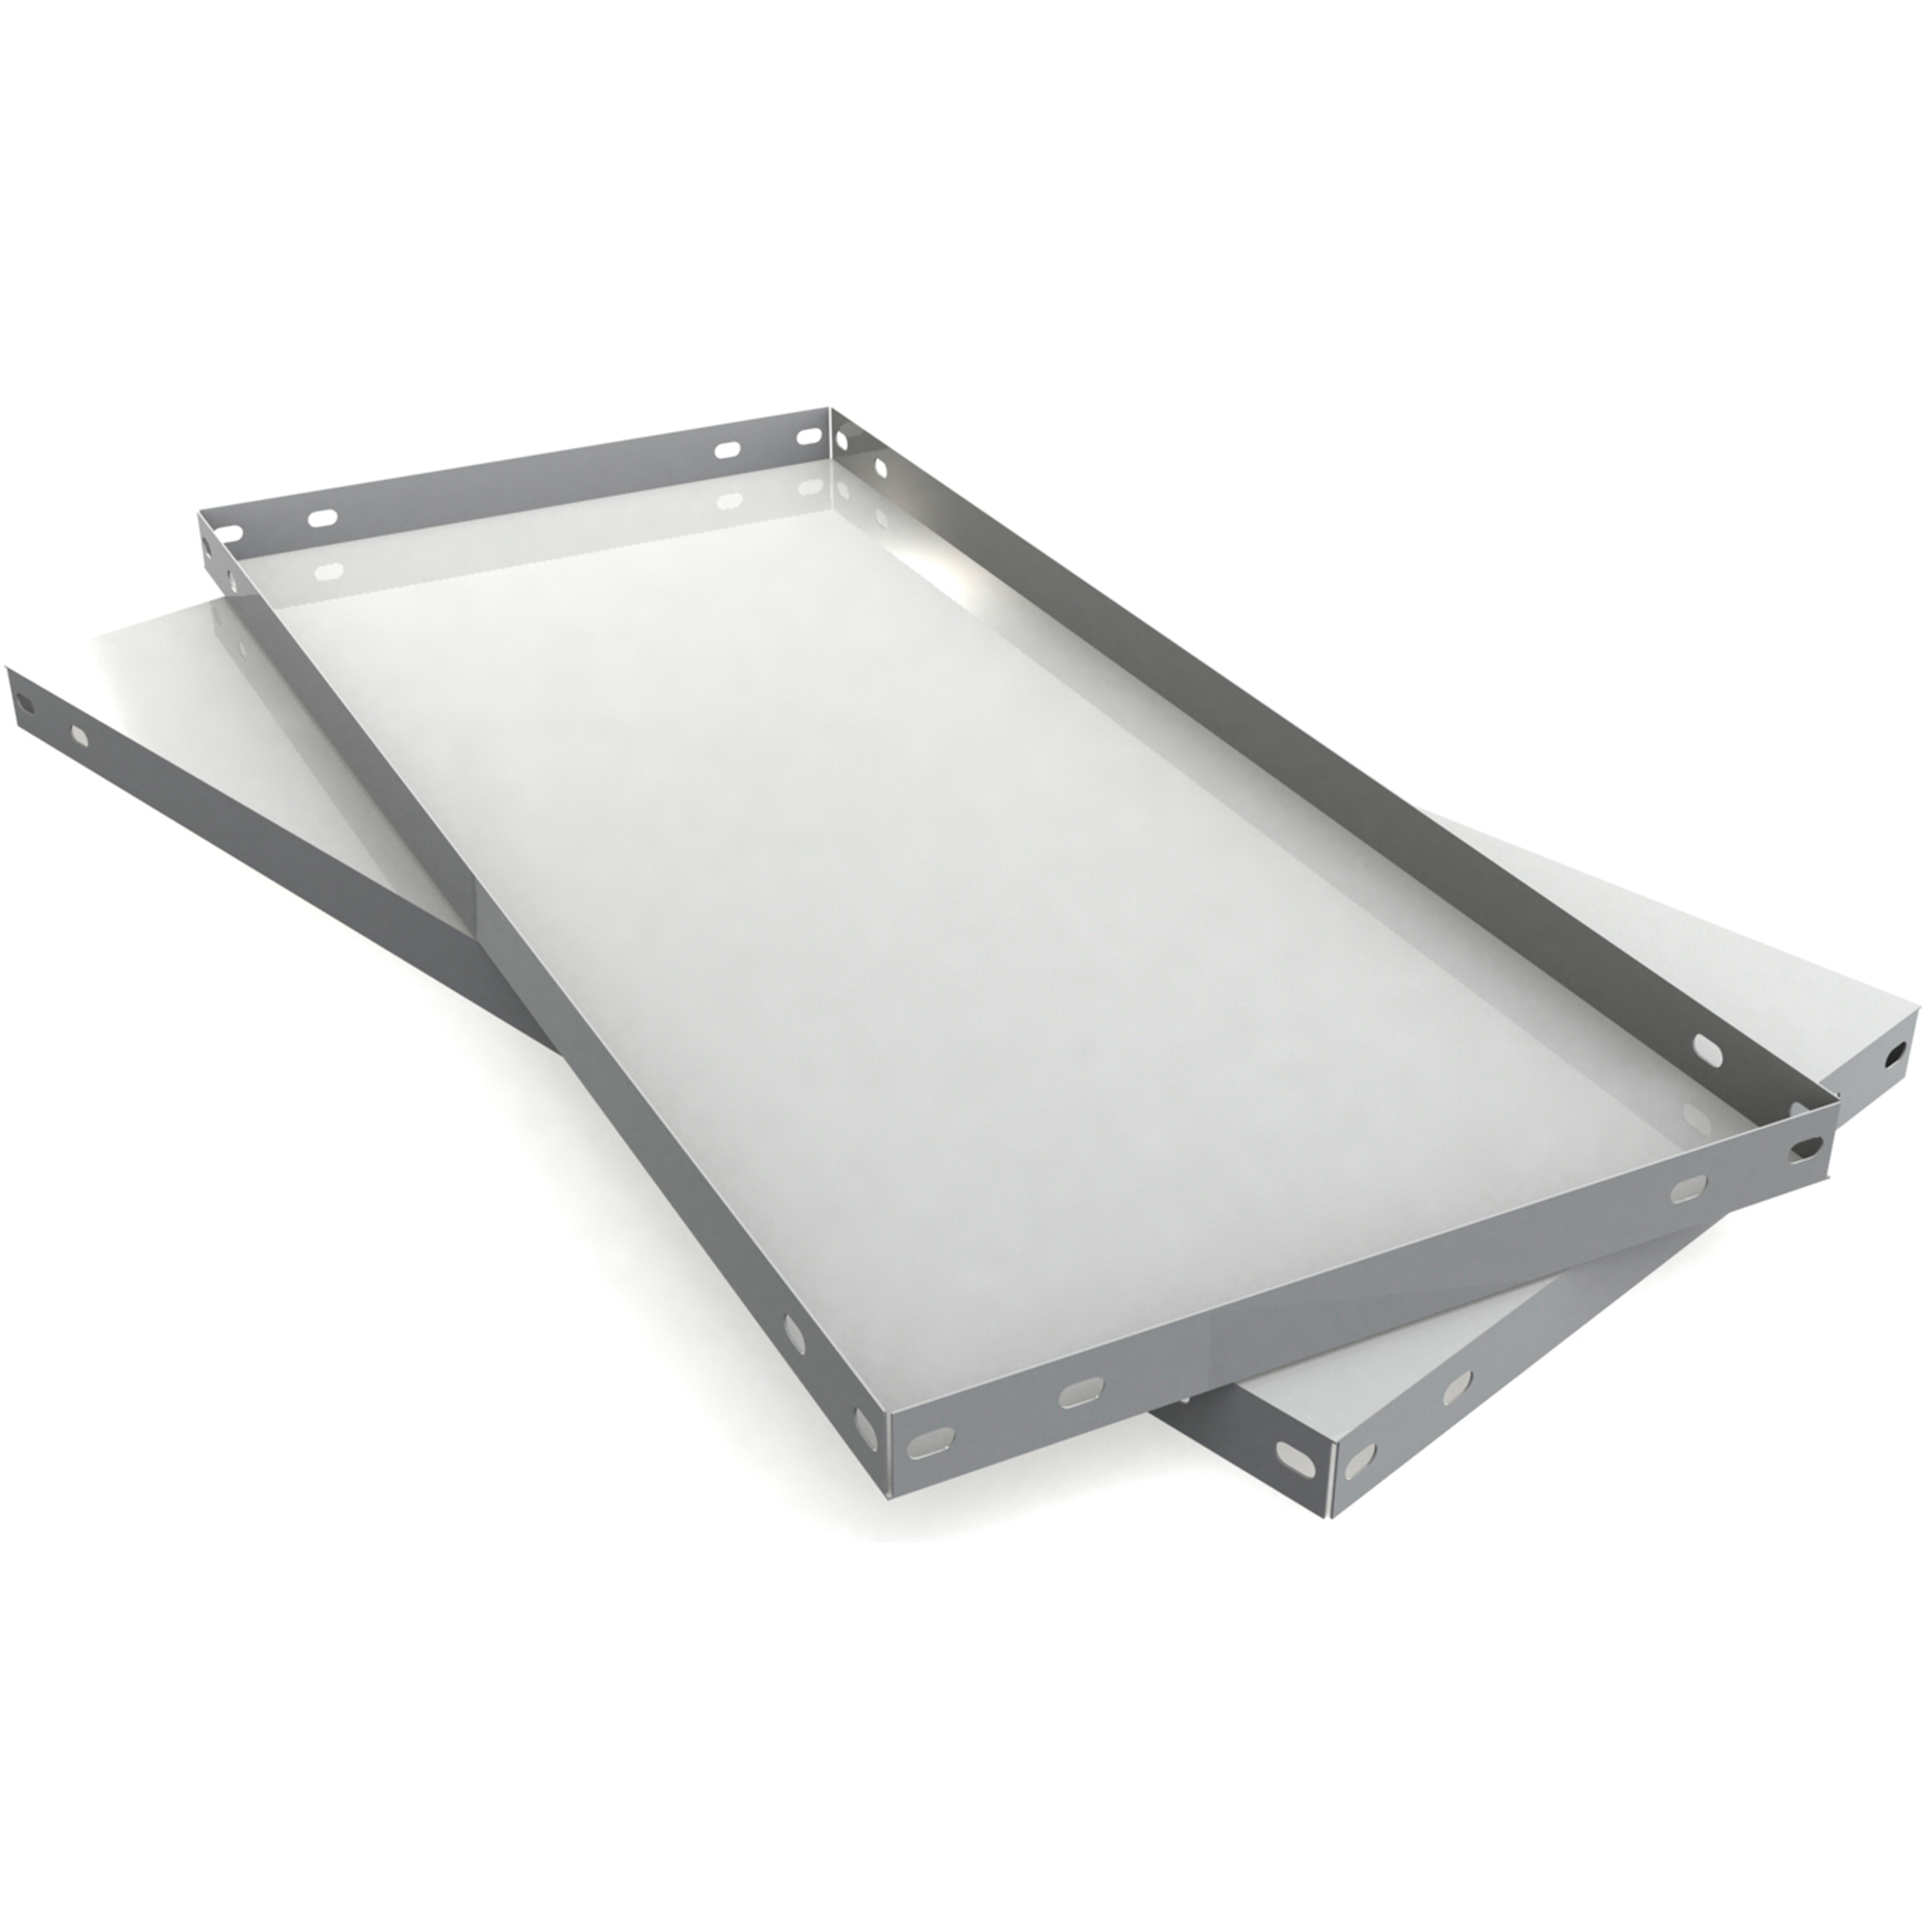 TRAY 900X600 ANTHRACITE